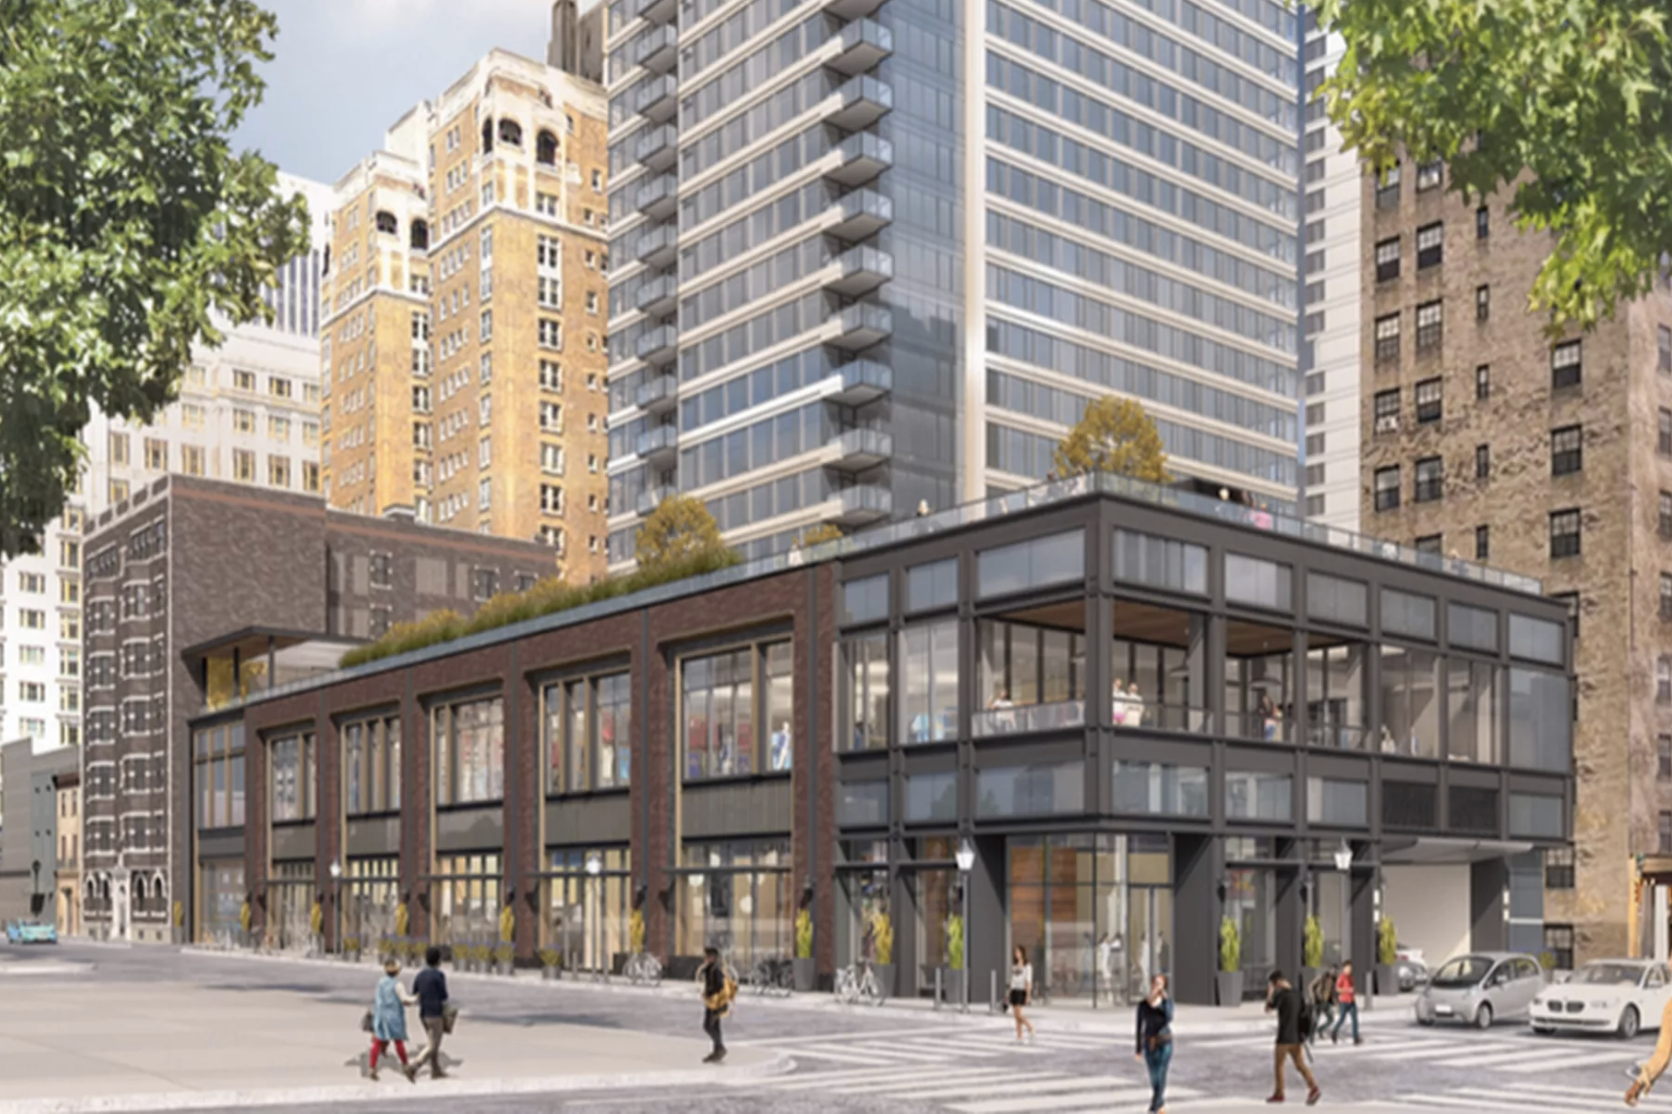 A rendering of The Laurel, under development at 1911 Walnut St. (courtesy of Southern Land Company)